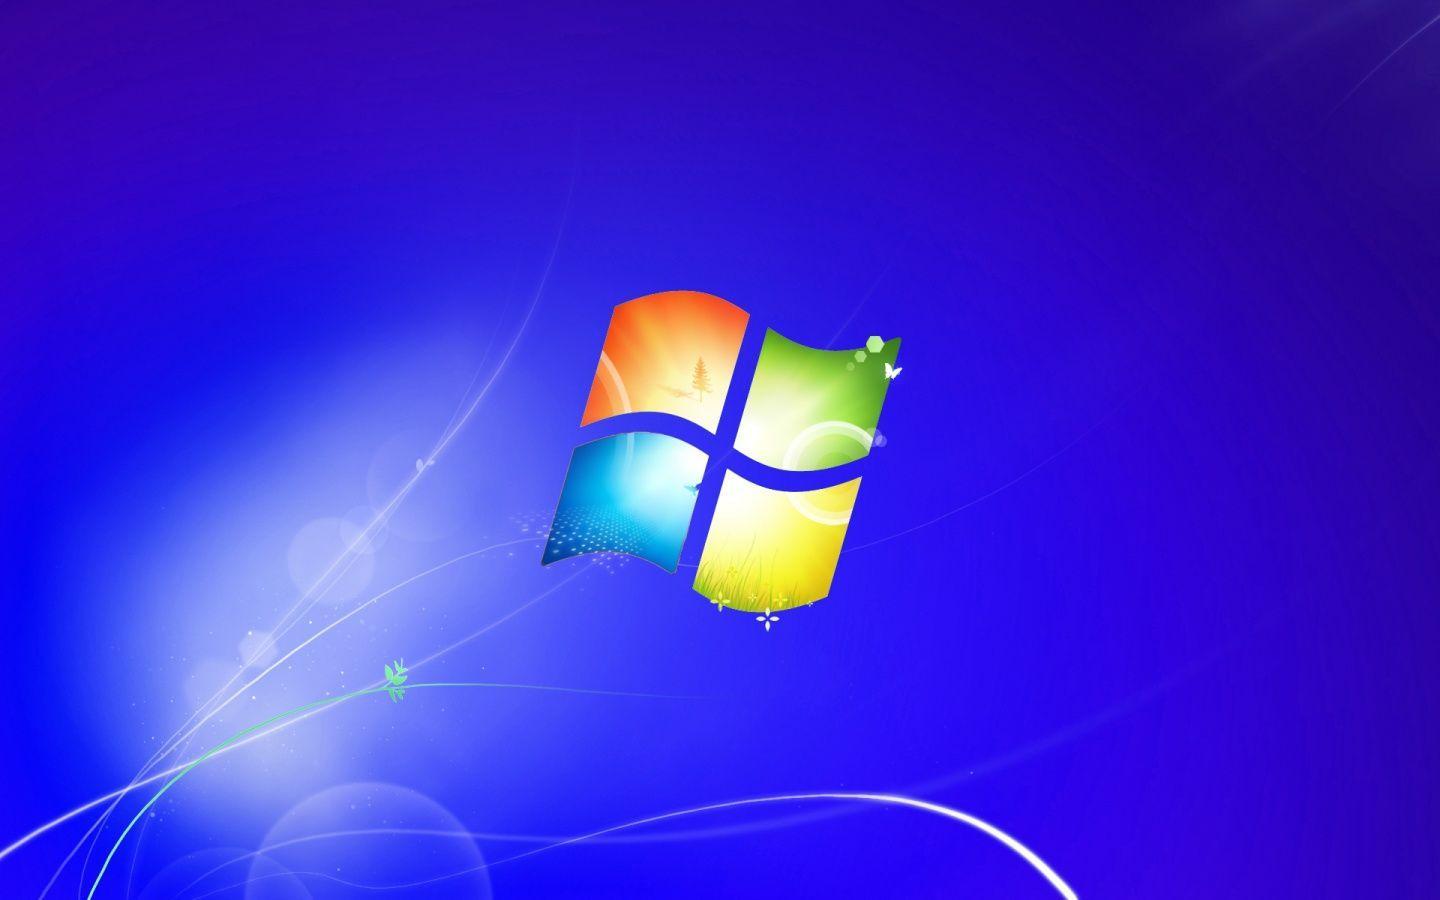 Windows 7 Official Wallpapers - My Bios